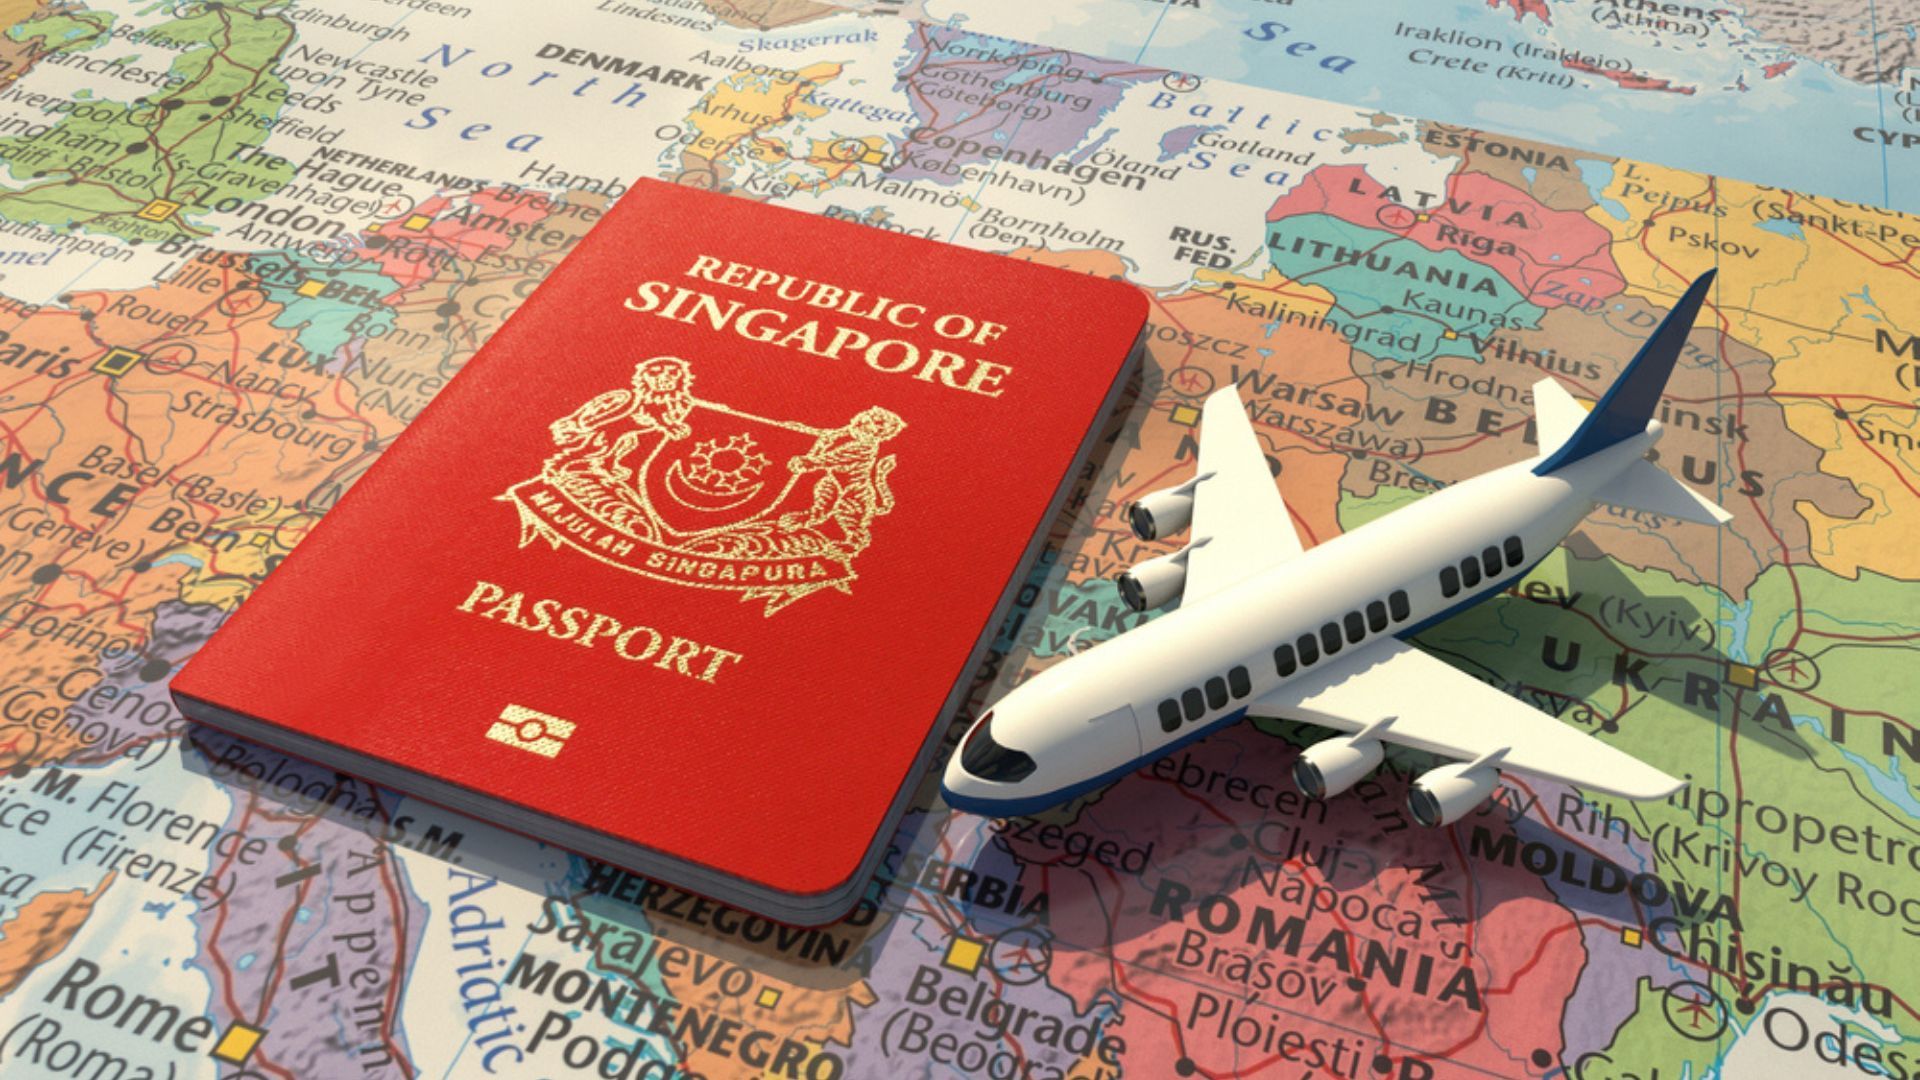 RankingRoyals - World's Most Powerful Passports in 2023. Japanese and  Singaporean Passports are the most Powerful passports in the world right  now with visa-free access to 193 destinations. South Korea, another asian